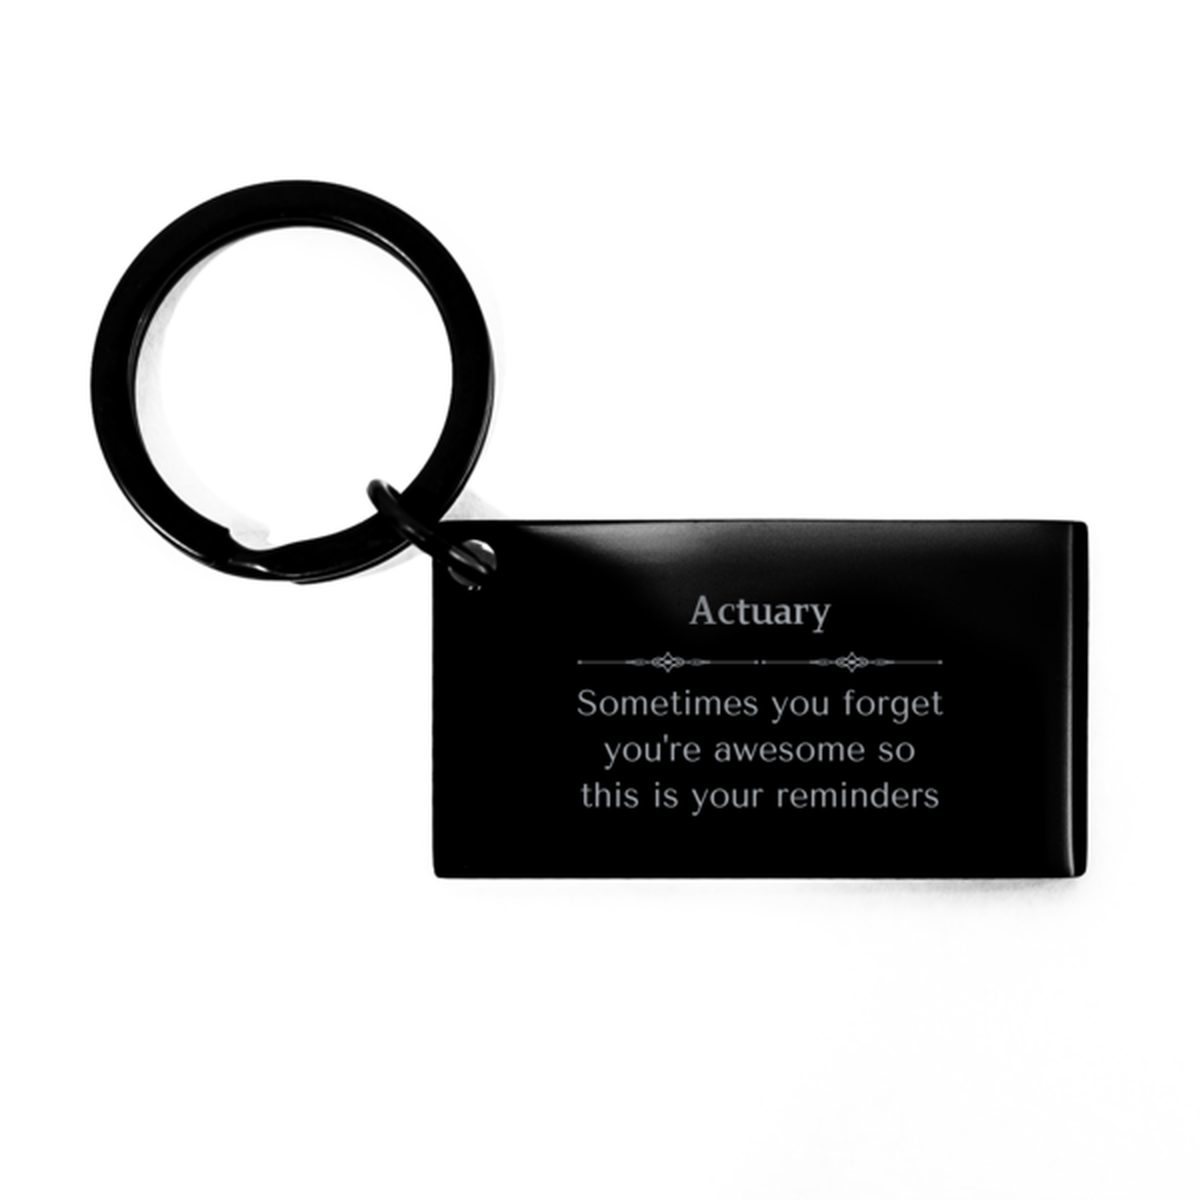 Sentimental Actuary Keychain, Bookbinder Sometimes you forget you're awesome so this is your reminders, Graduation Christmas Birthday Gifts for Actuary, Men, Women, Coworkers